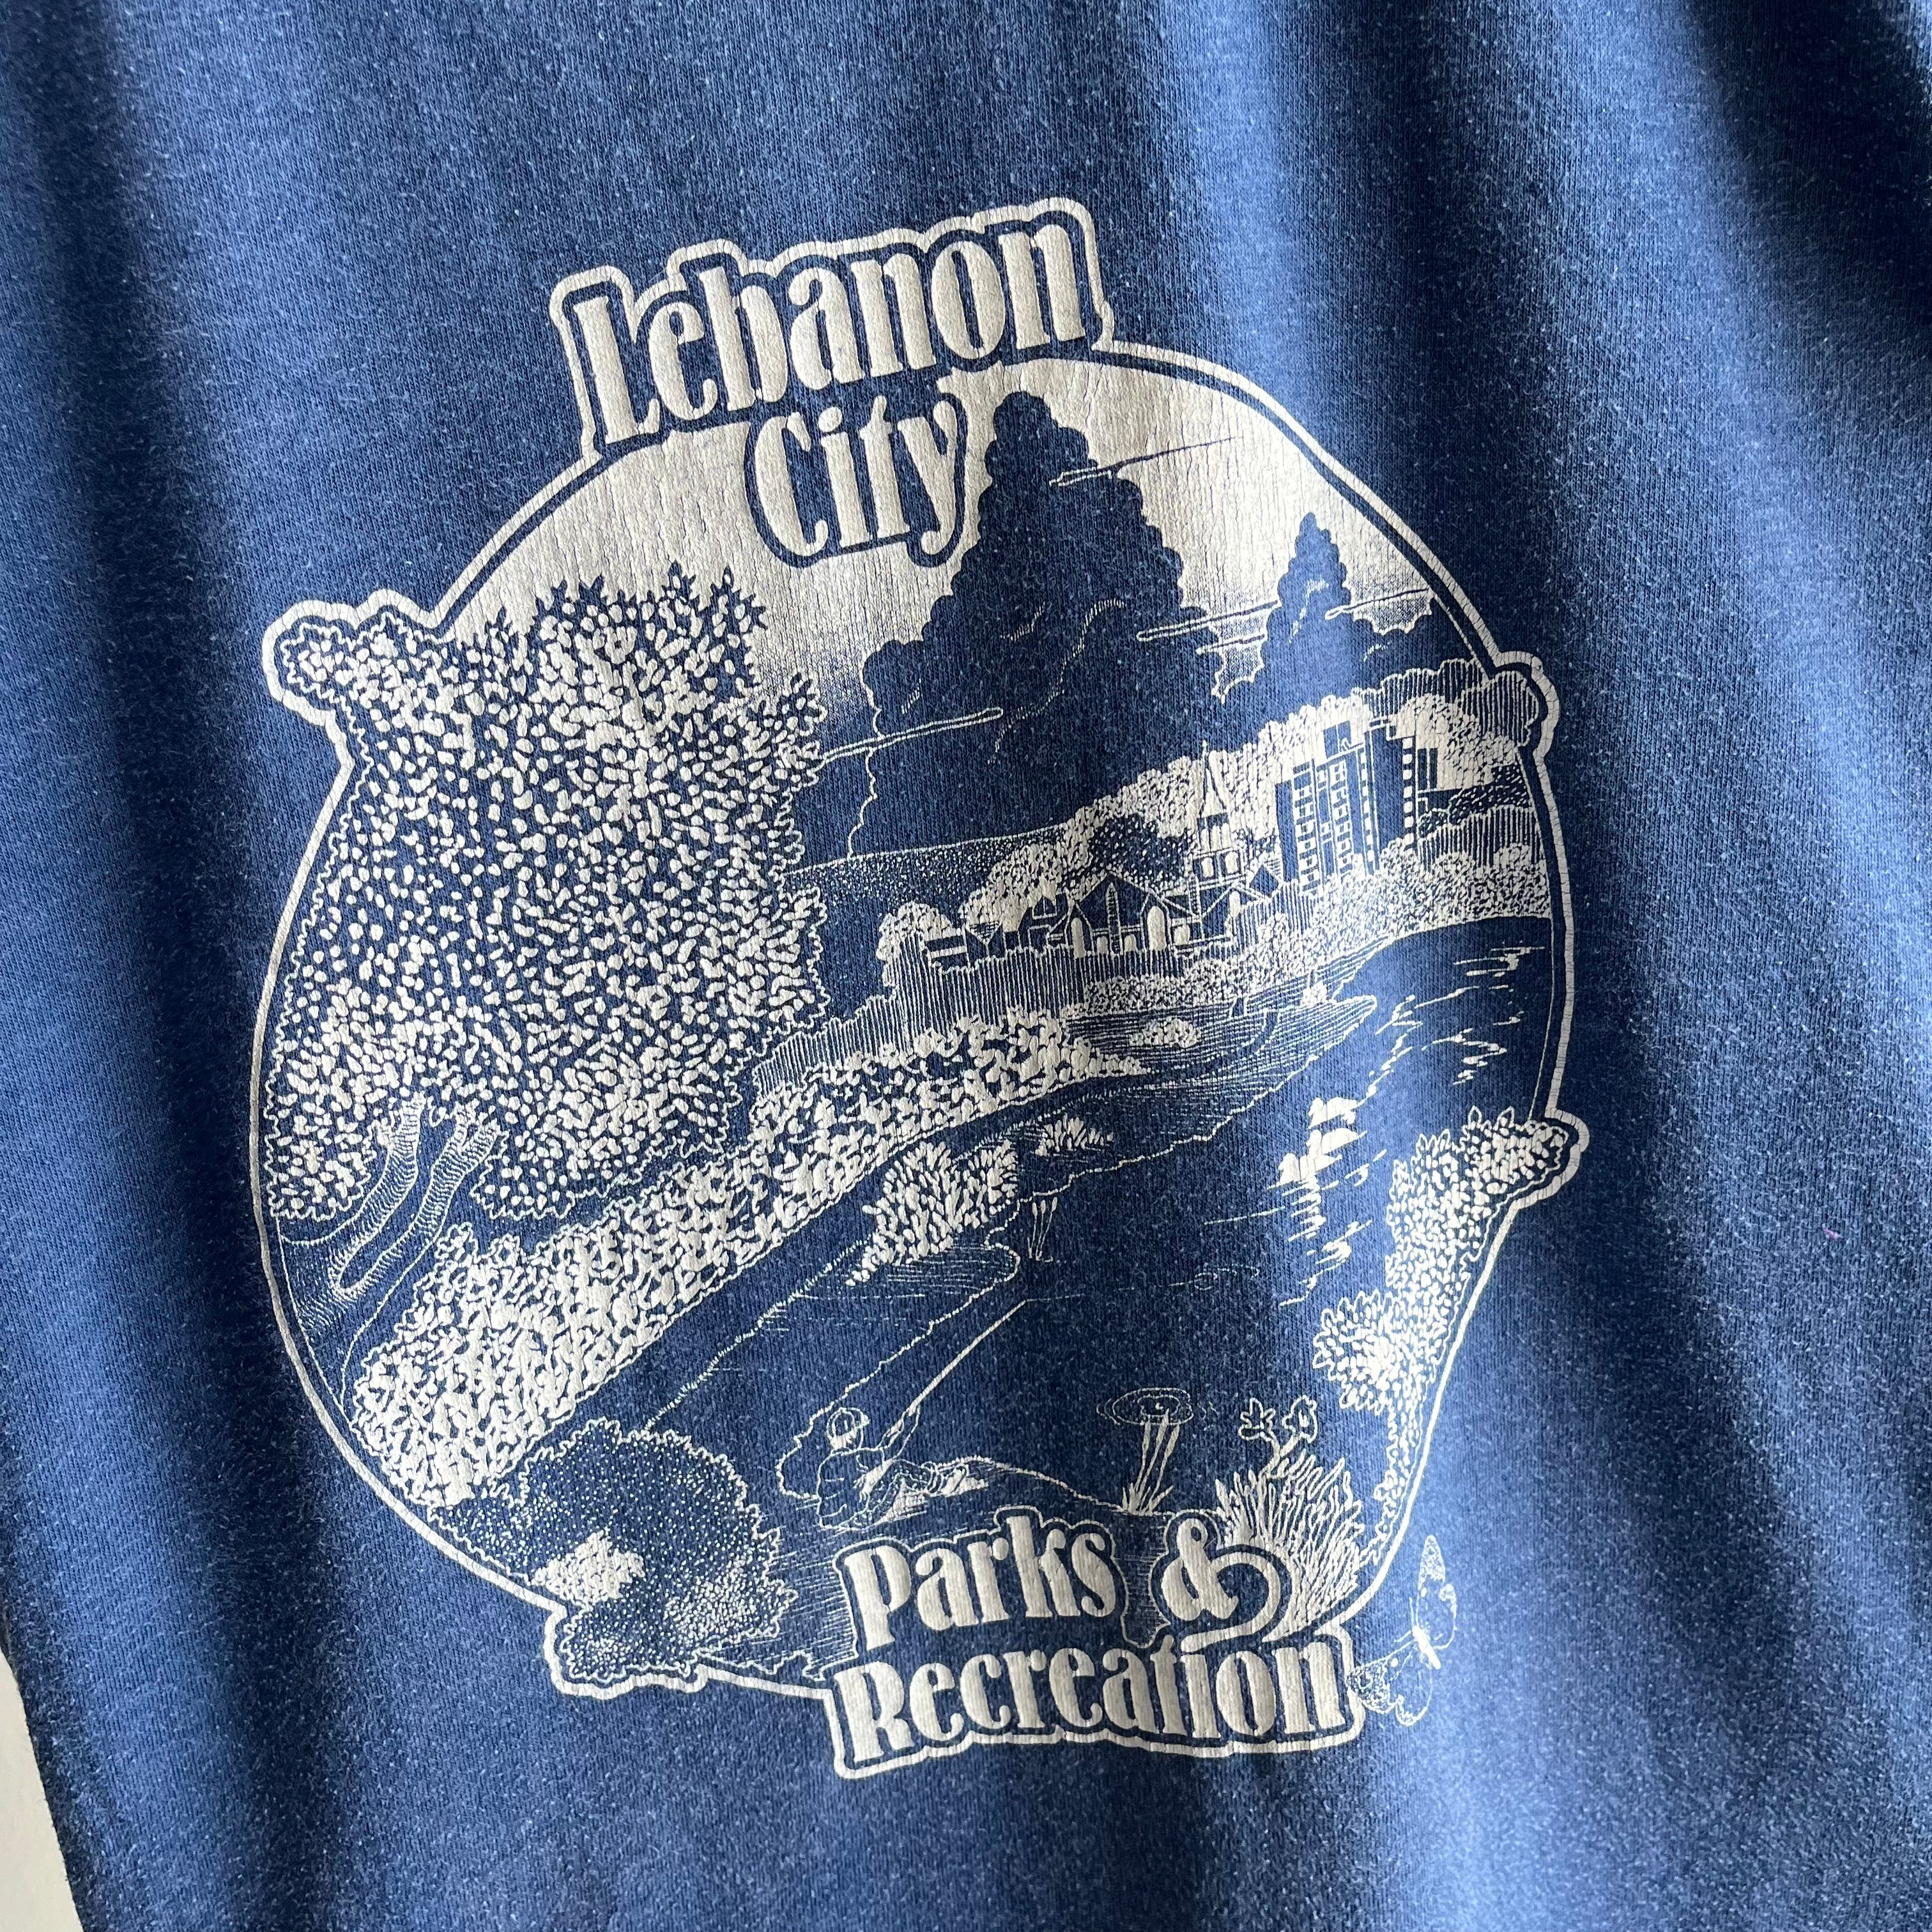 1970/80 Lebanon City Parks and Recreation T-Shirt